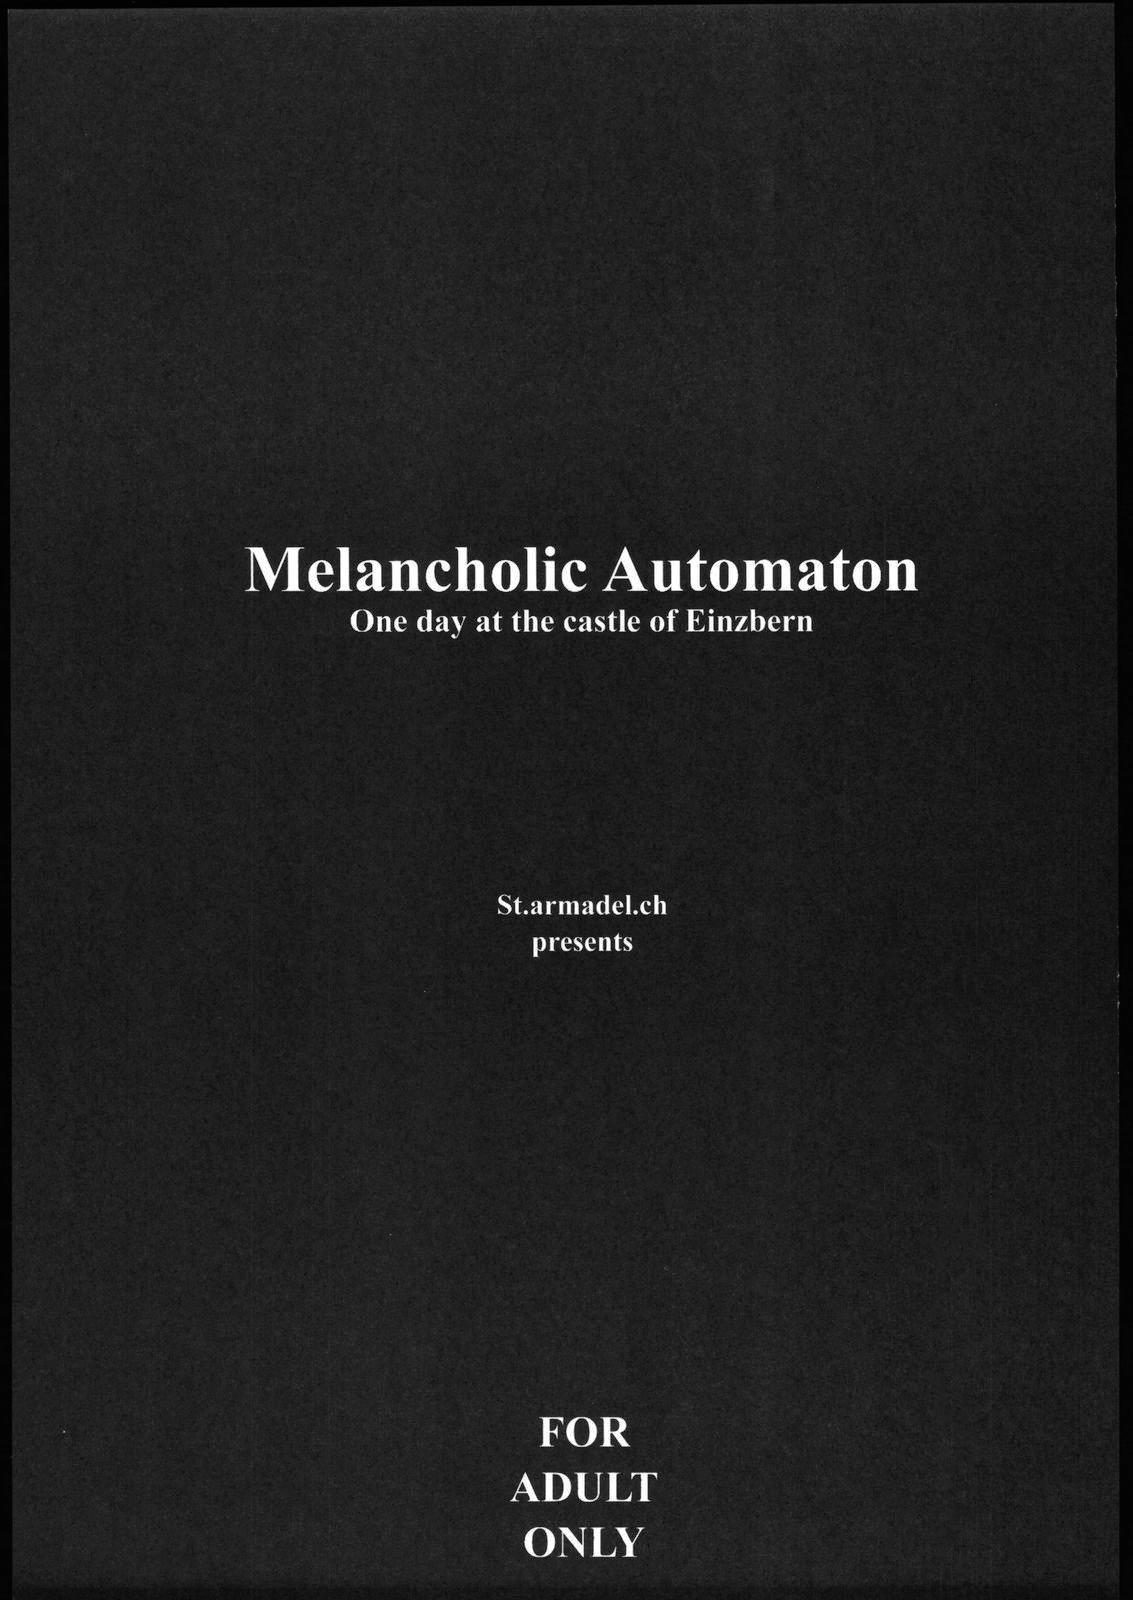 Brother Melancholic Automaton - One day at the castle of Einzbern - Fate stay night Couple Sex - Page 2